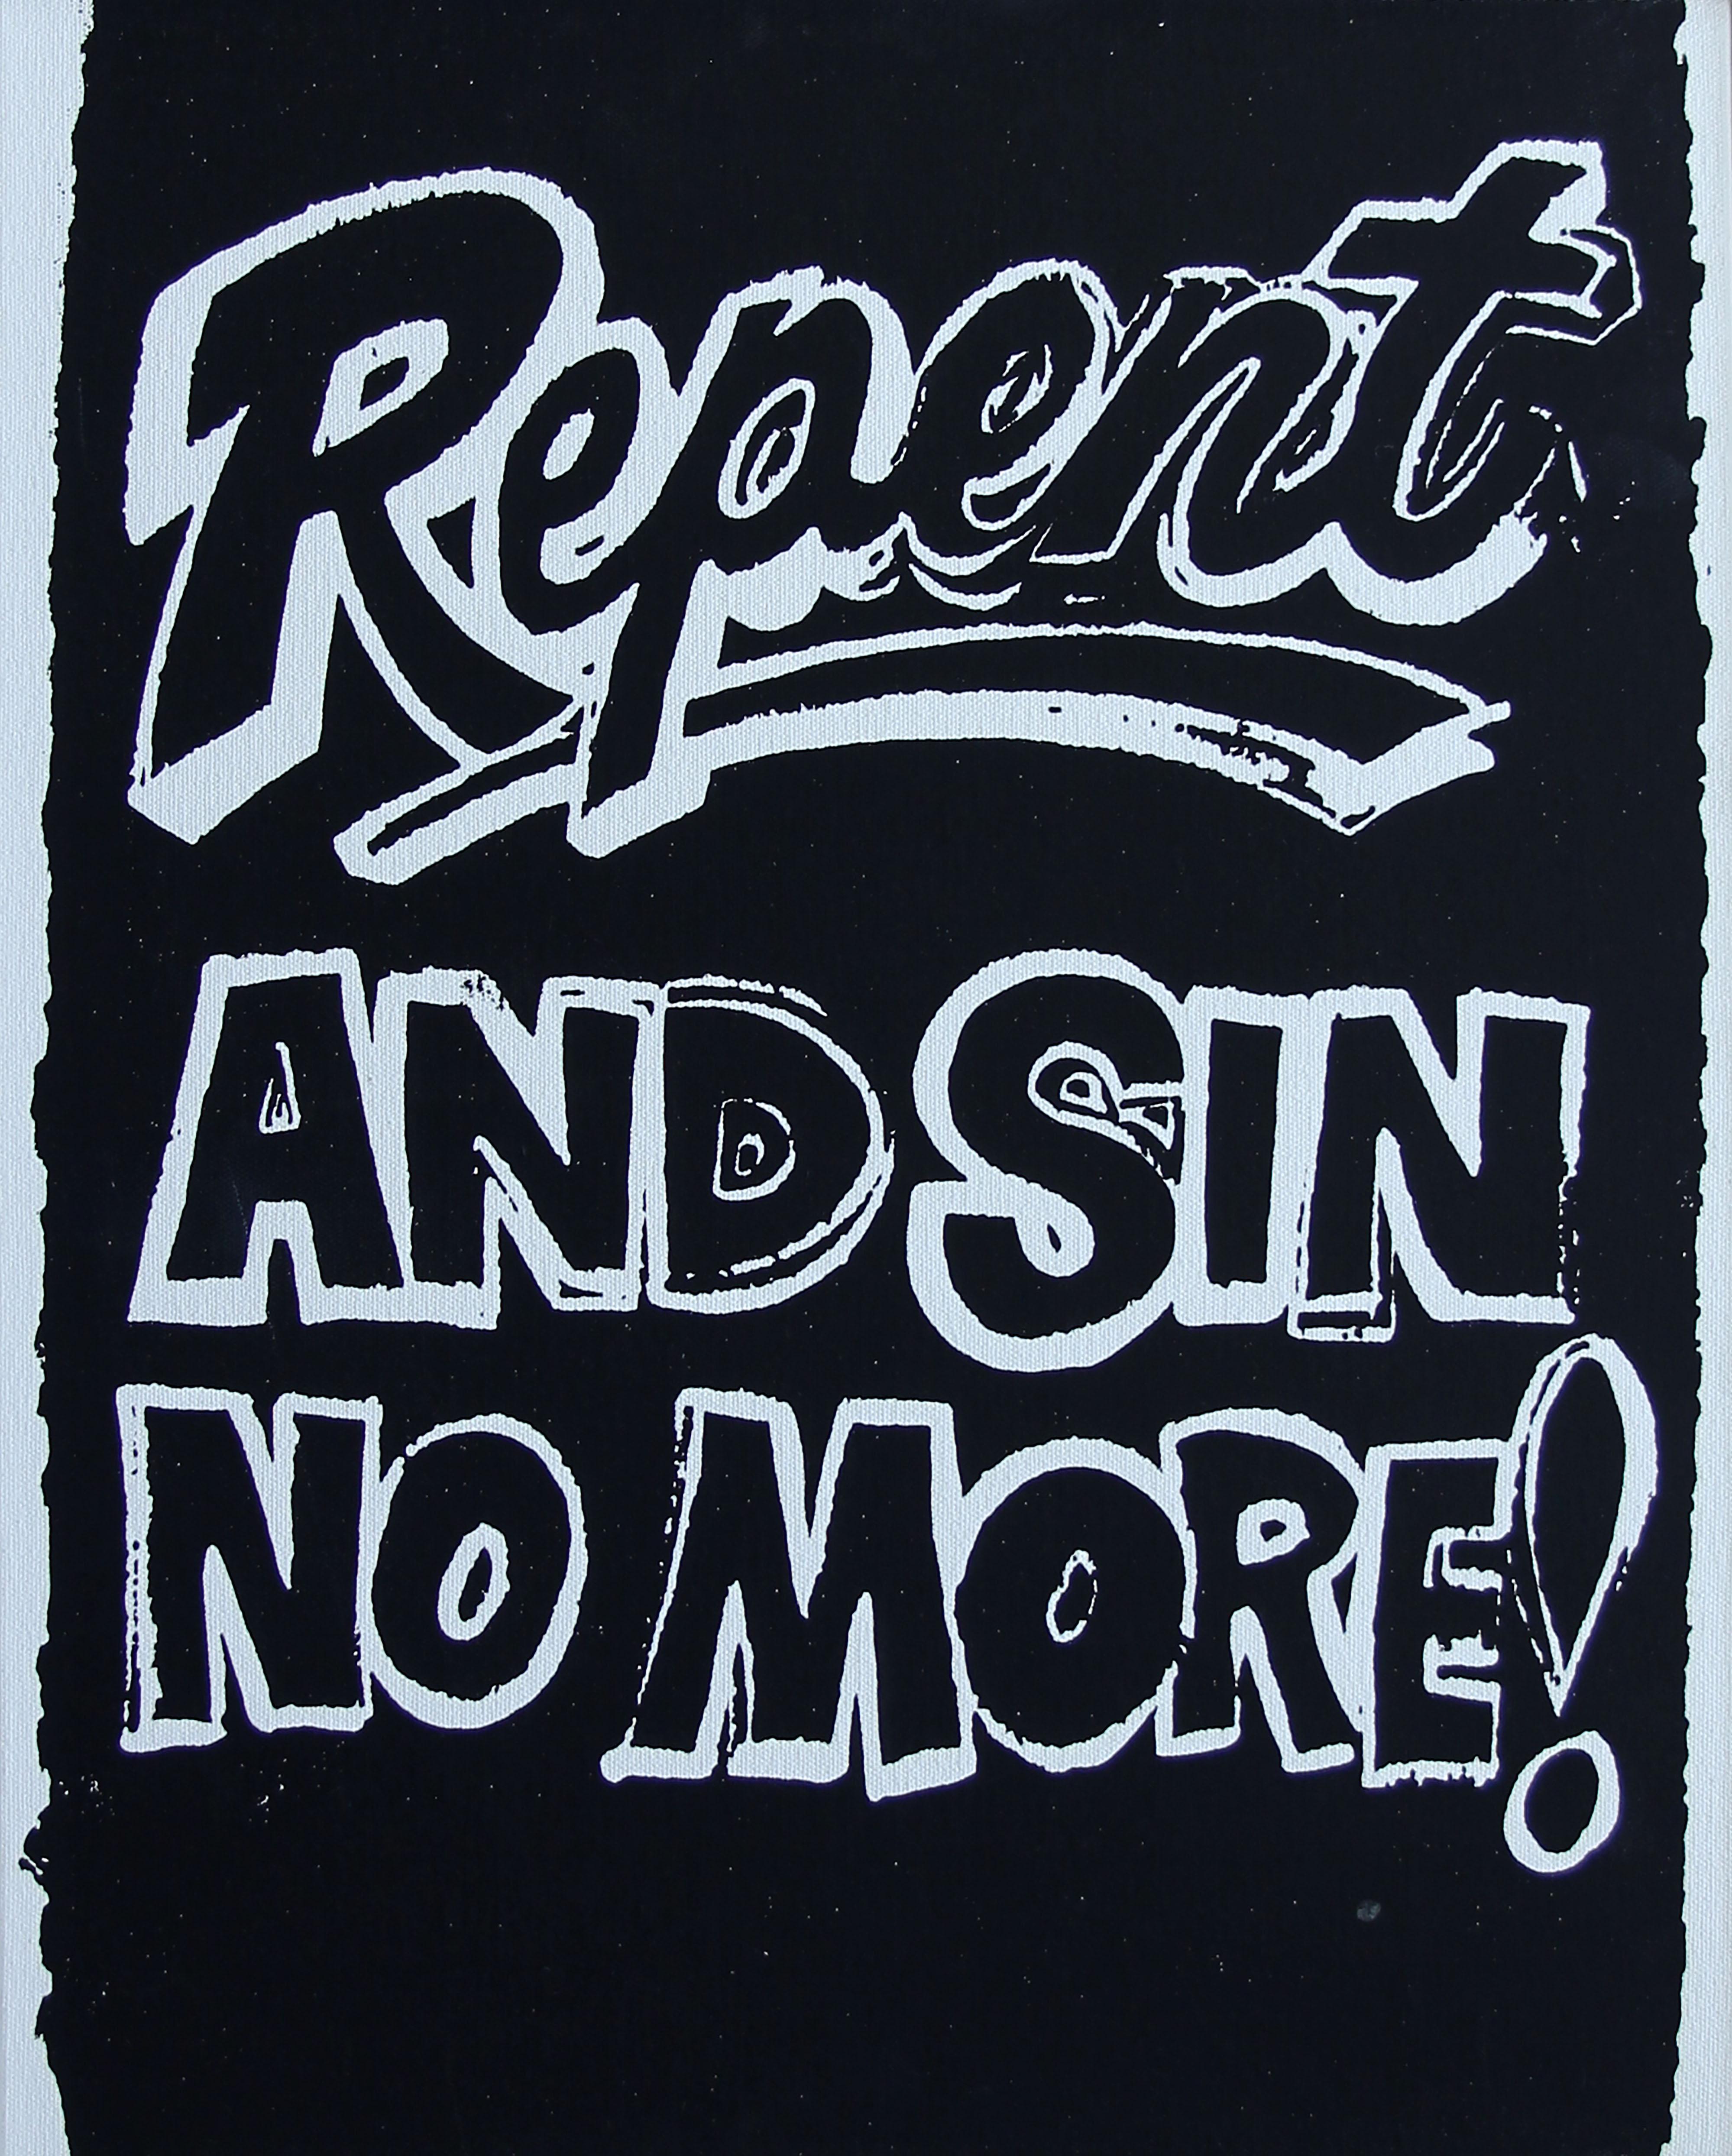 Denied Warhol Repent & Sin No More Black and White Painting by Charles Lutz
Silkscreen and acrylic on canvas with Denied stamp of the Andy Warhol Art Authentication Board.
20 x 16" inches
2008

Lutz's 2007 ''Warhol Denied'' series gained